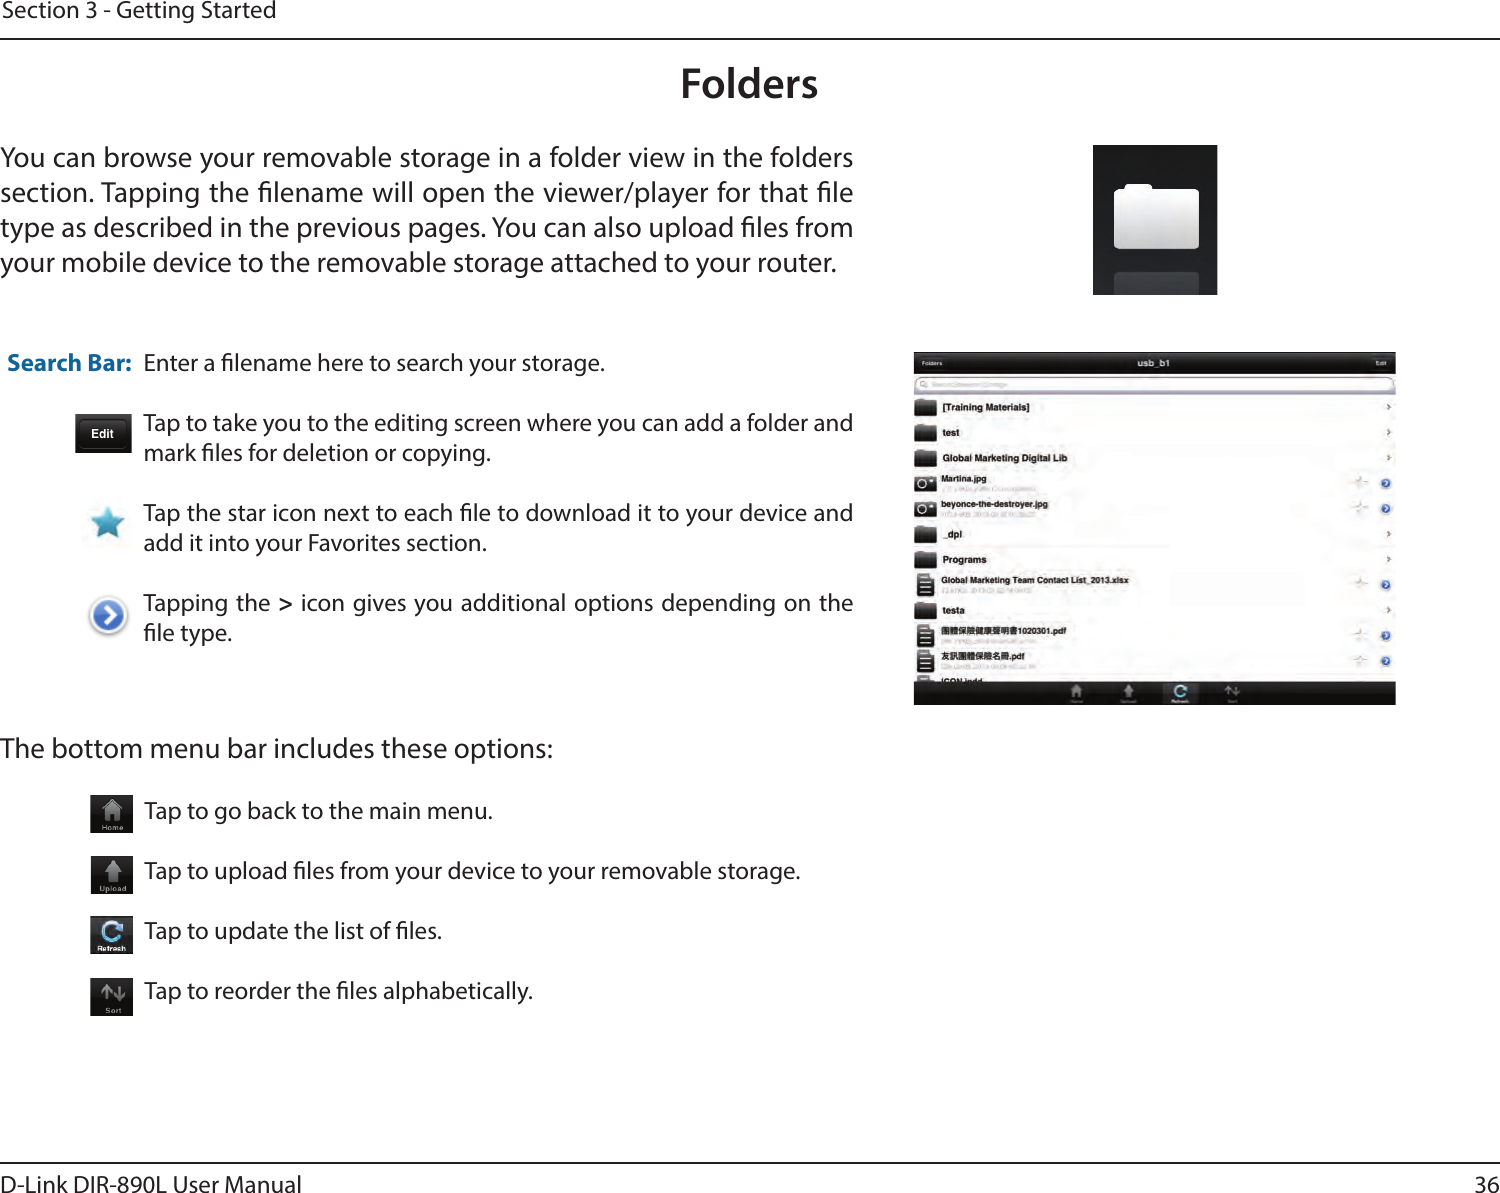 36D-Link DIR-890L User ManualSection 3 - Getting StartedFoldersYou can browse your removable storage in a folder view in the folders section. Tapping the lename will open the viewer/player for that le type as described in the previous pages. You can also upload les from your mobile device to the removable storage attached to your router.Enter a lename here to search your storage.Tap to take you to the editing screen where you can add a folder and mark les for deletion or copying.Tap the star icon next to each le to download it to your device and add it into your Favorites section.Tapping the &gt; icon gives you additional options depending on the le type.Search Bar:The bottom menu bar includes these options:Tap to go back to the main menu.Tap to upload les from your device to your removable storage.Tap to update the list of les.Tap to reorder the les alphabetically.